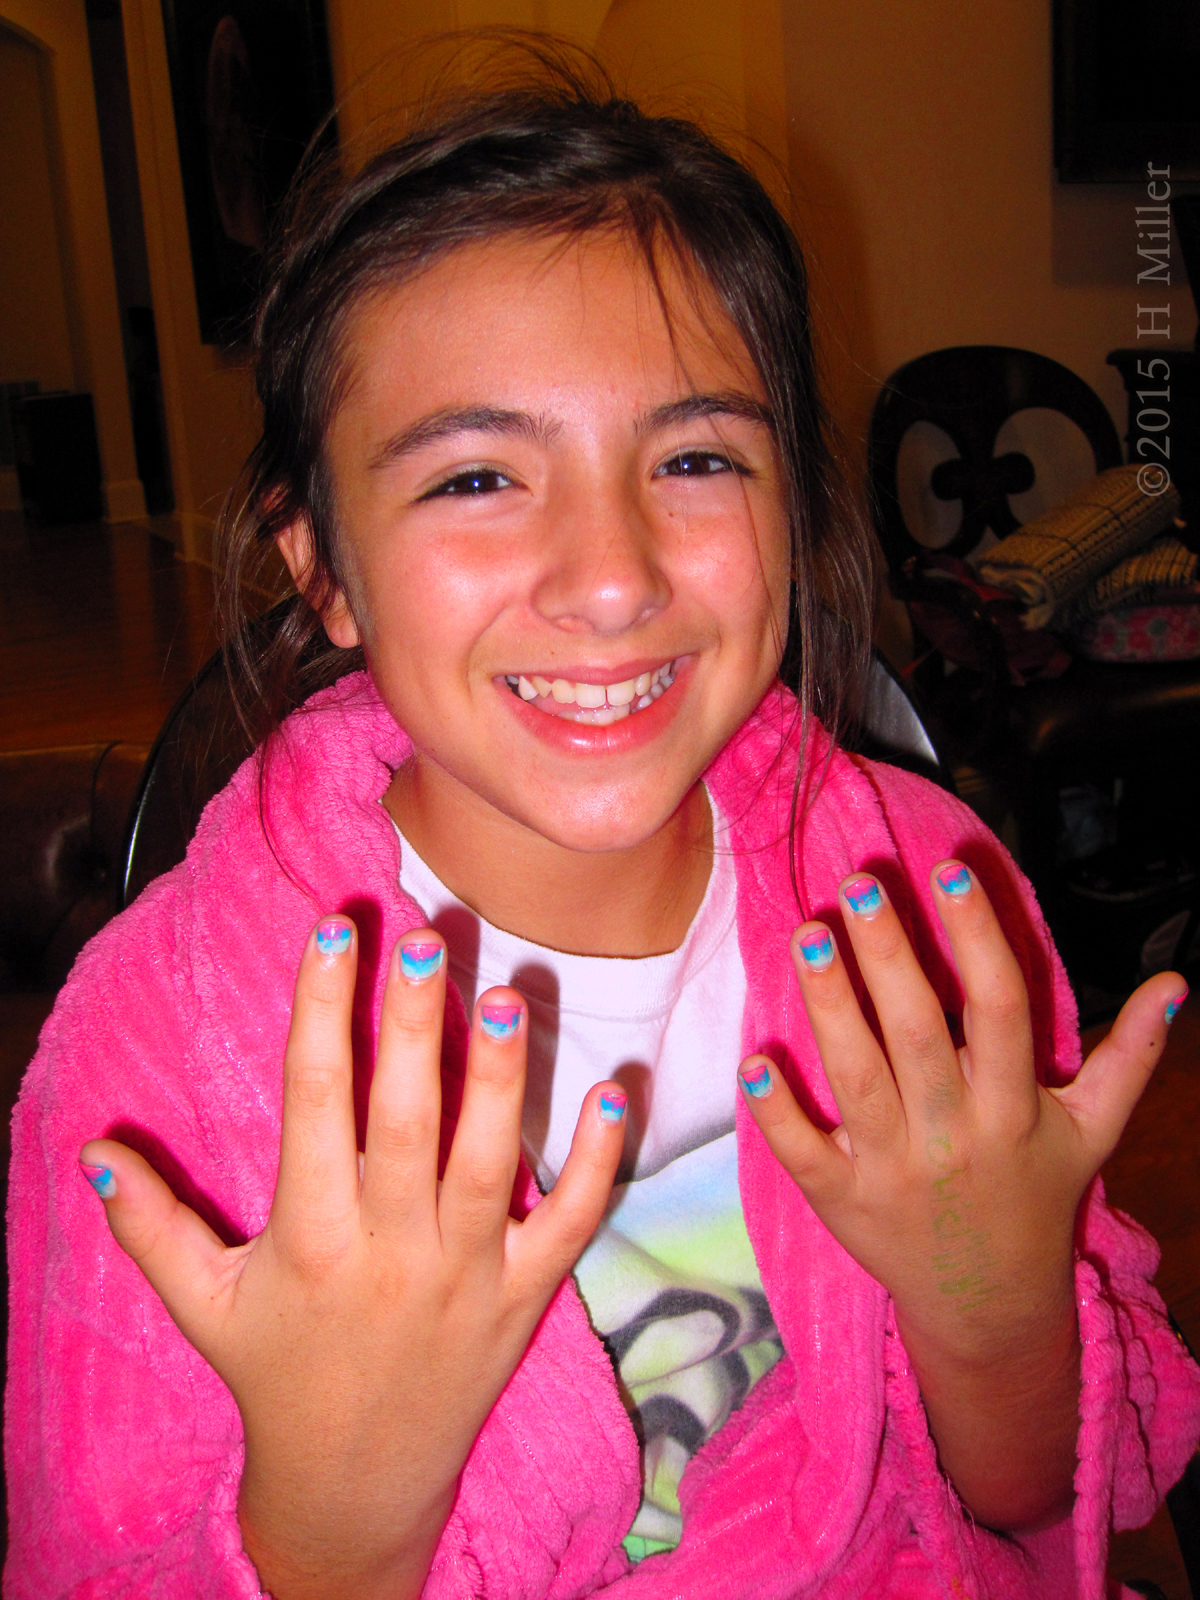 Another Big Smile With Her Nail Designs 